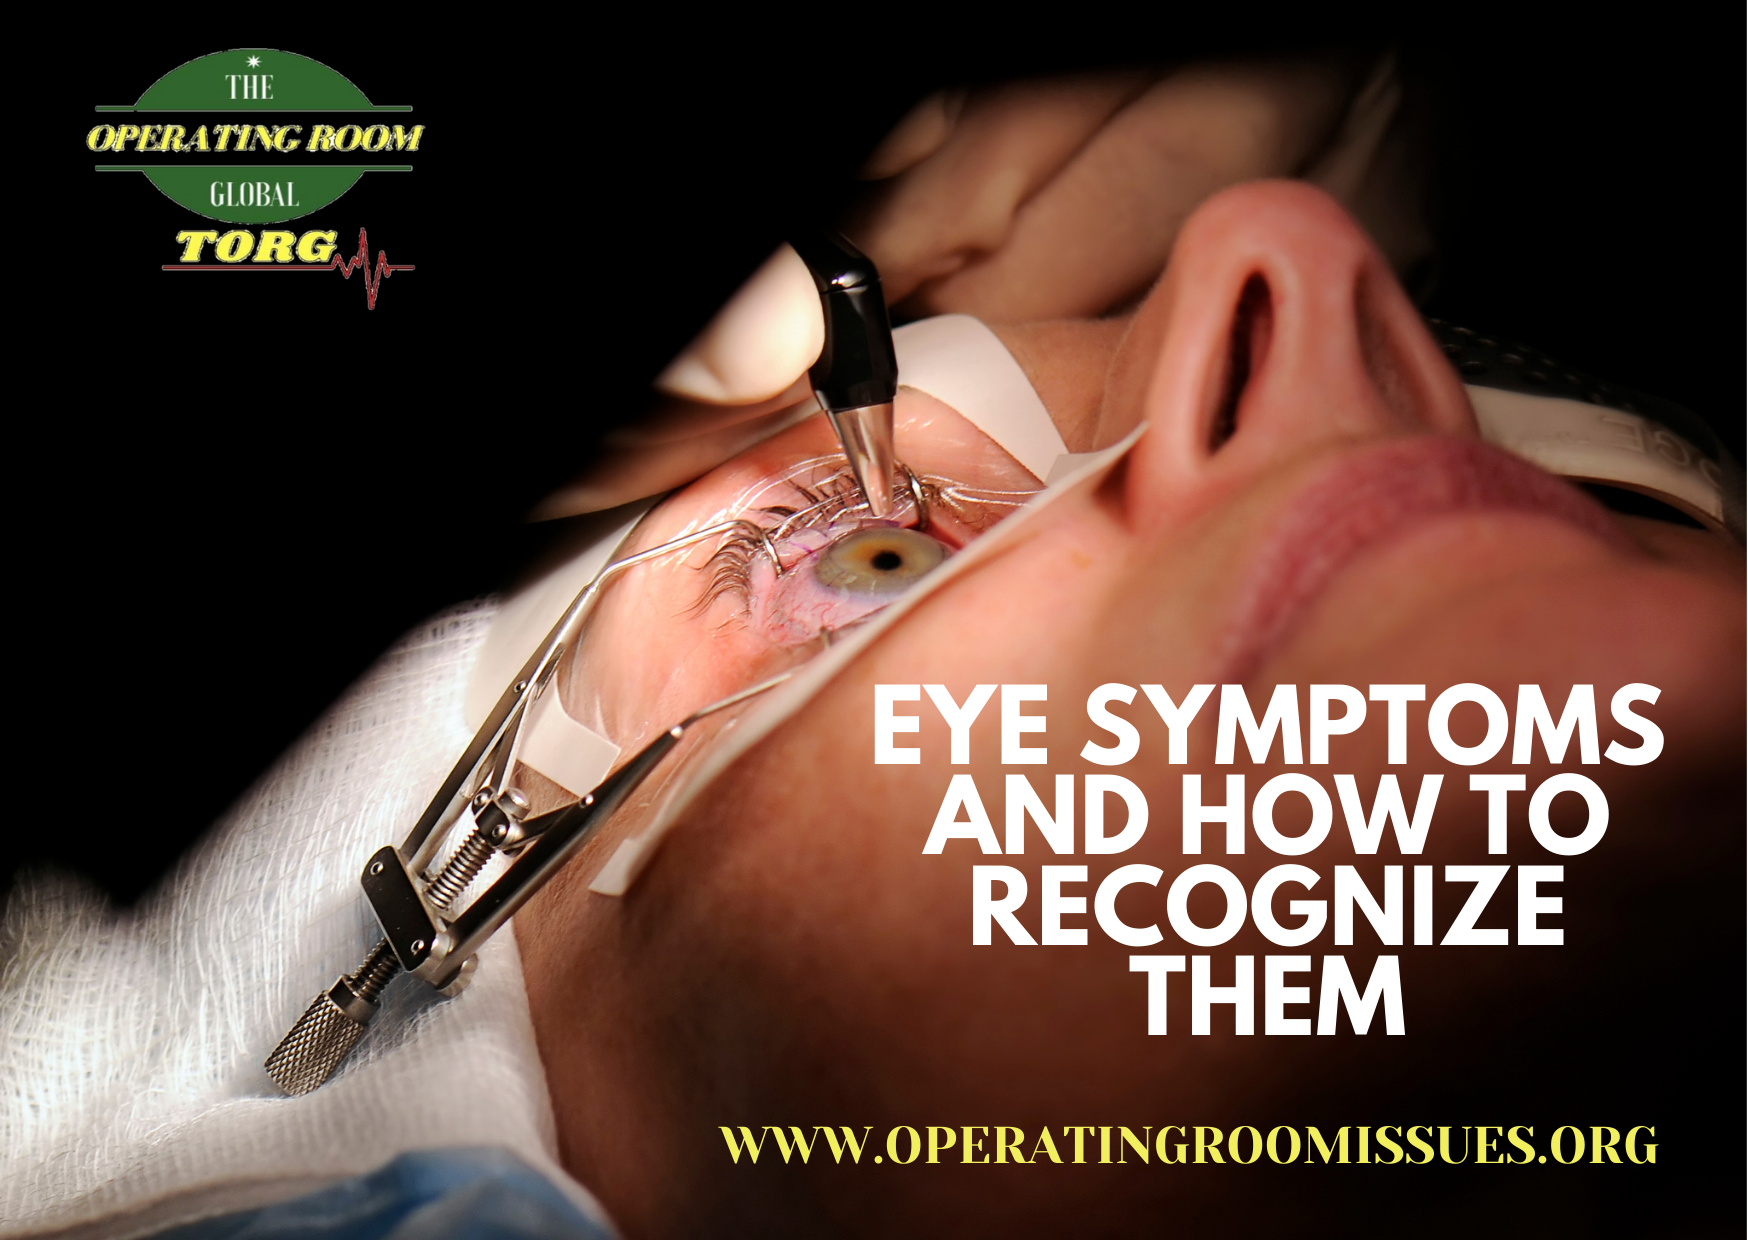 Eye Symptoms and How to Recognize Them